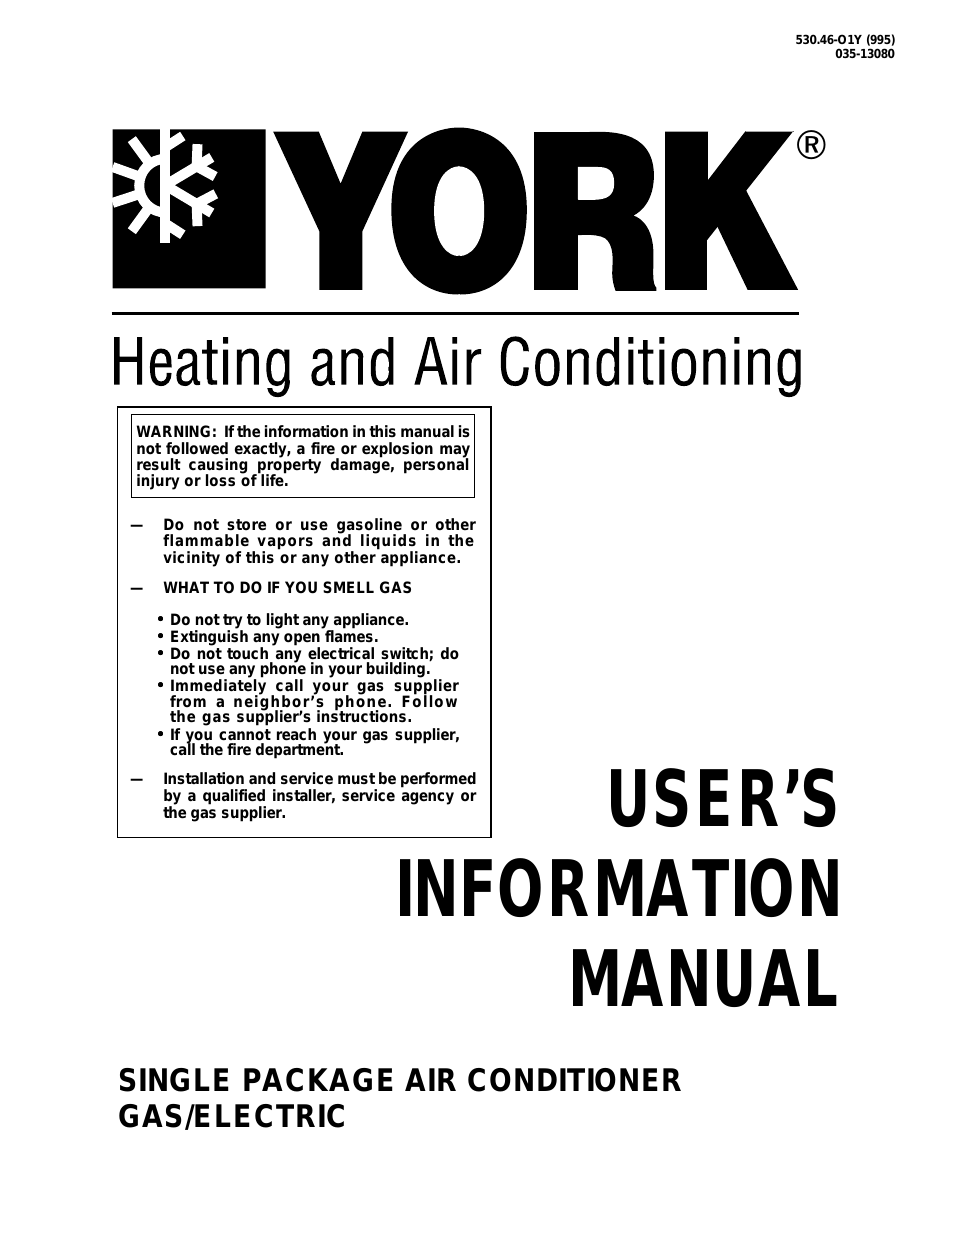 Heating & AIR CONDITIONER